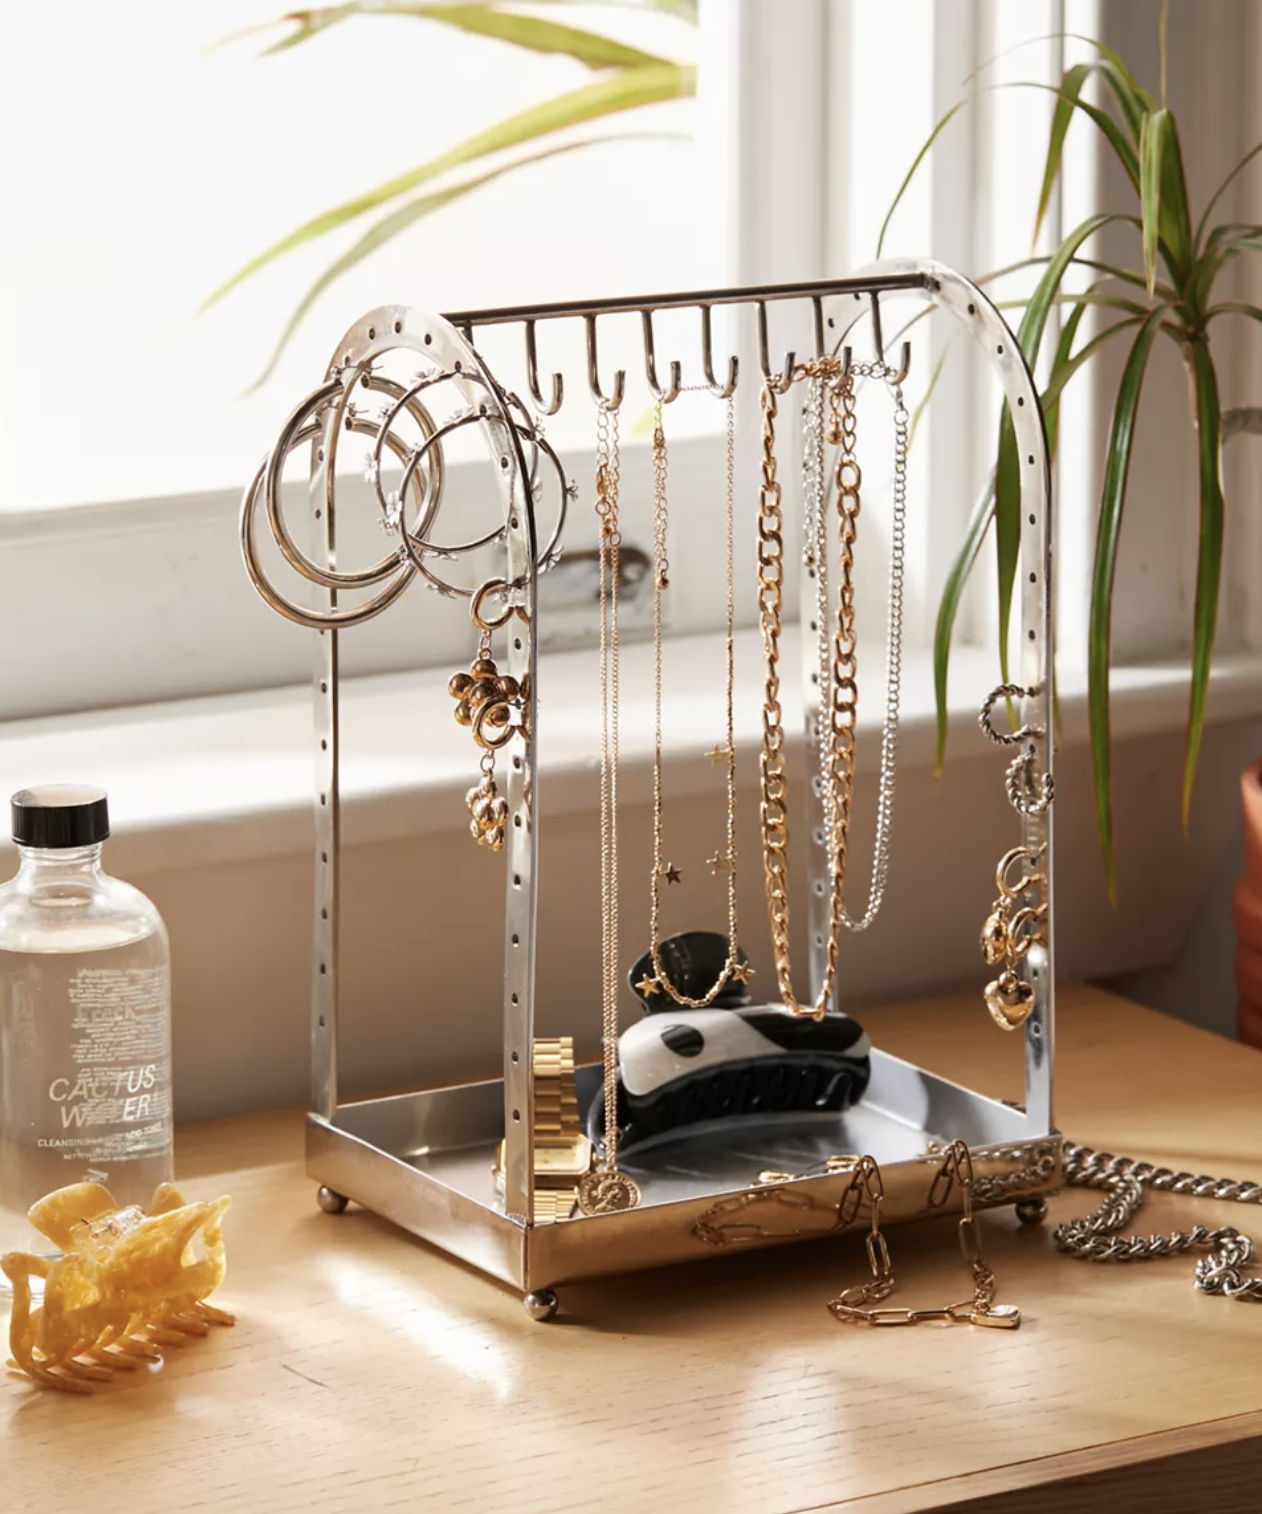 Several chains and hoops on the jewellery organizer